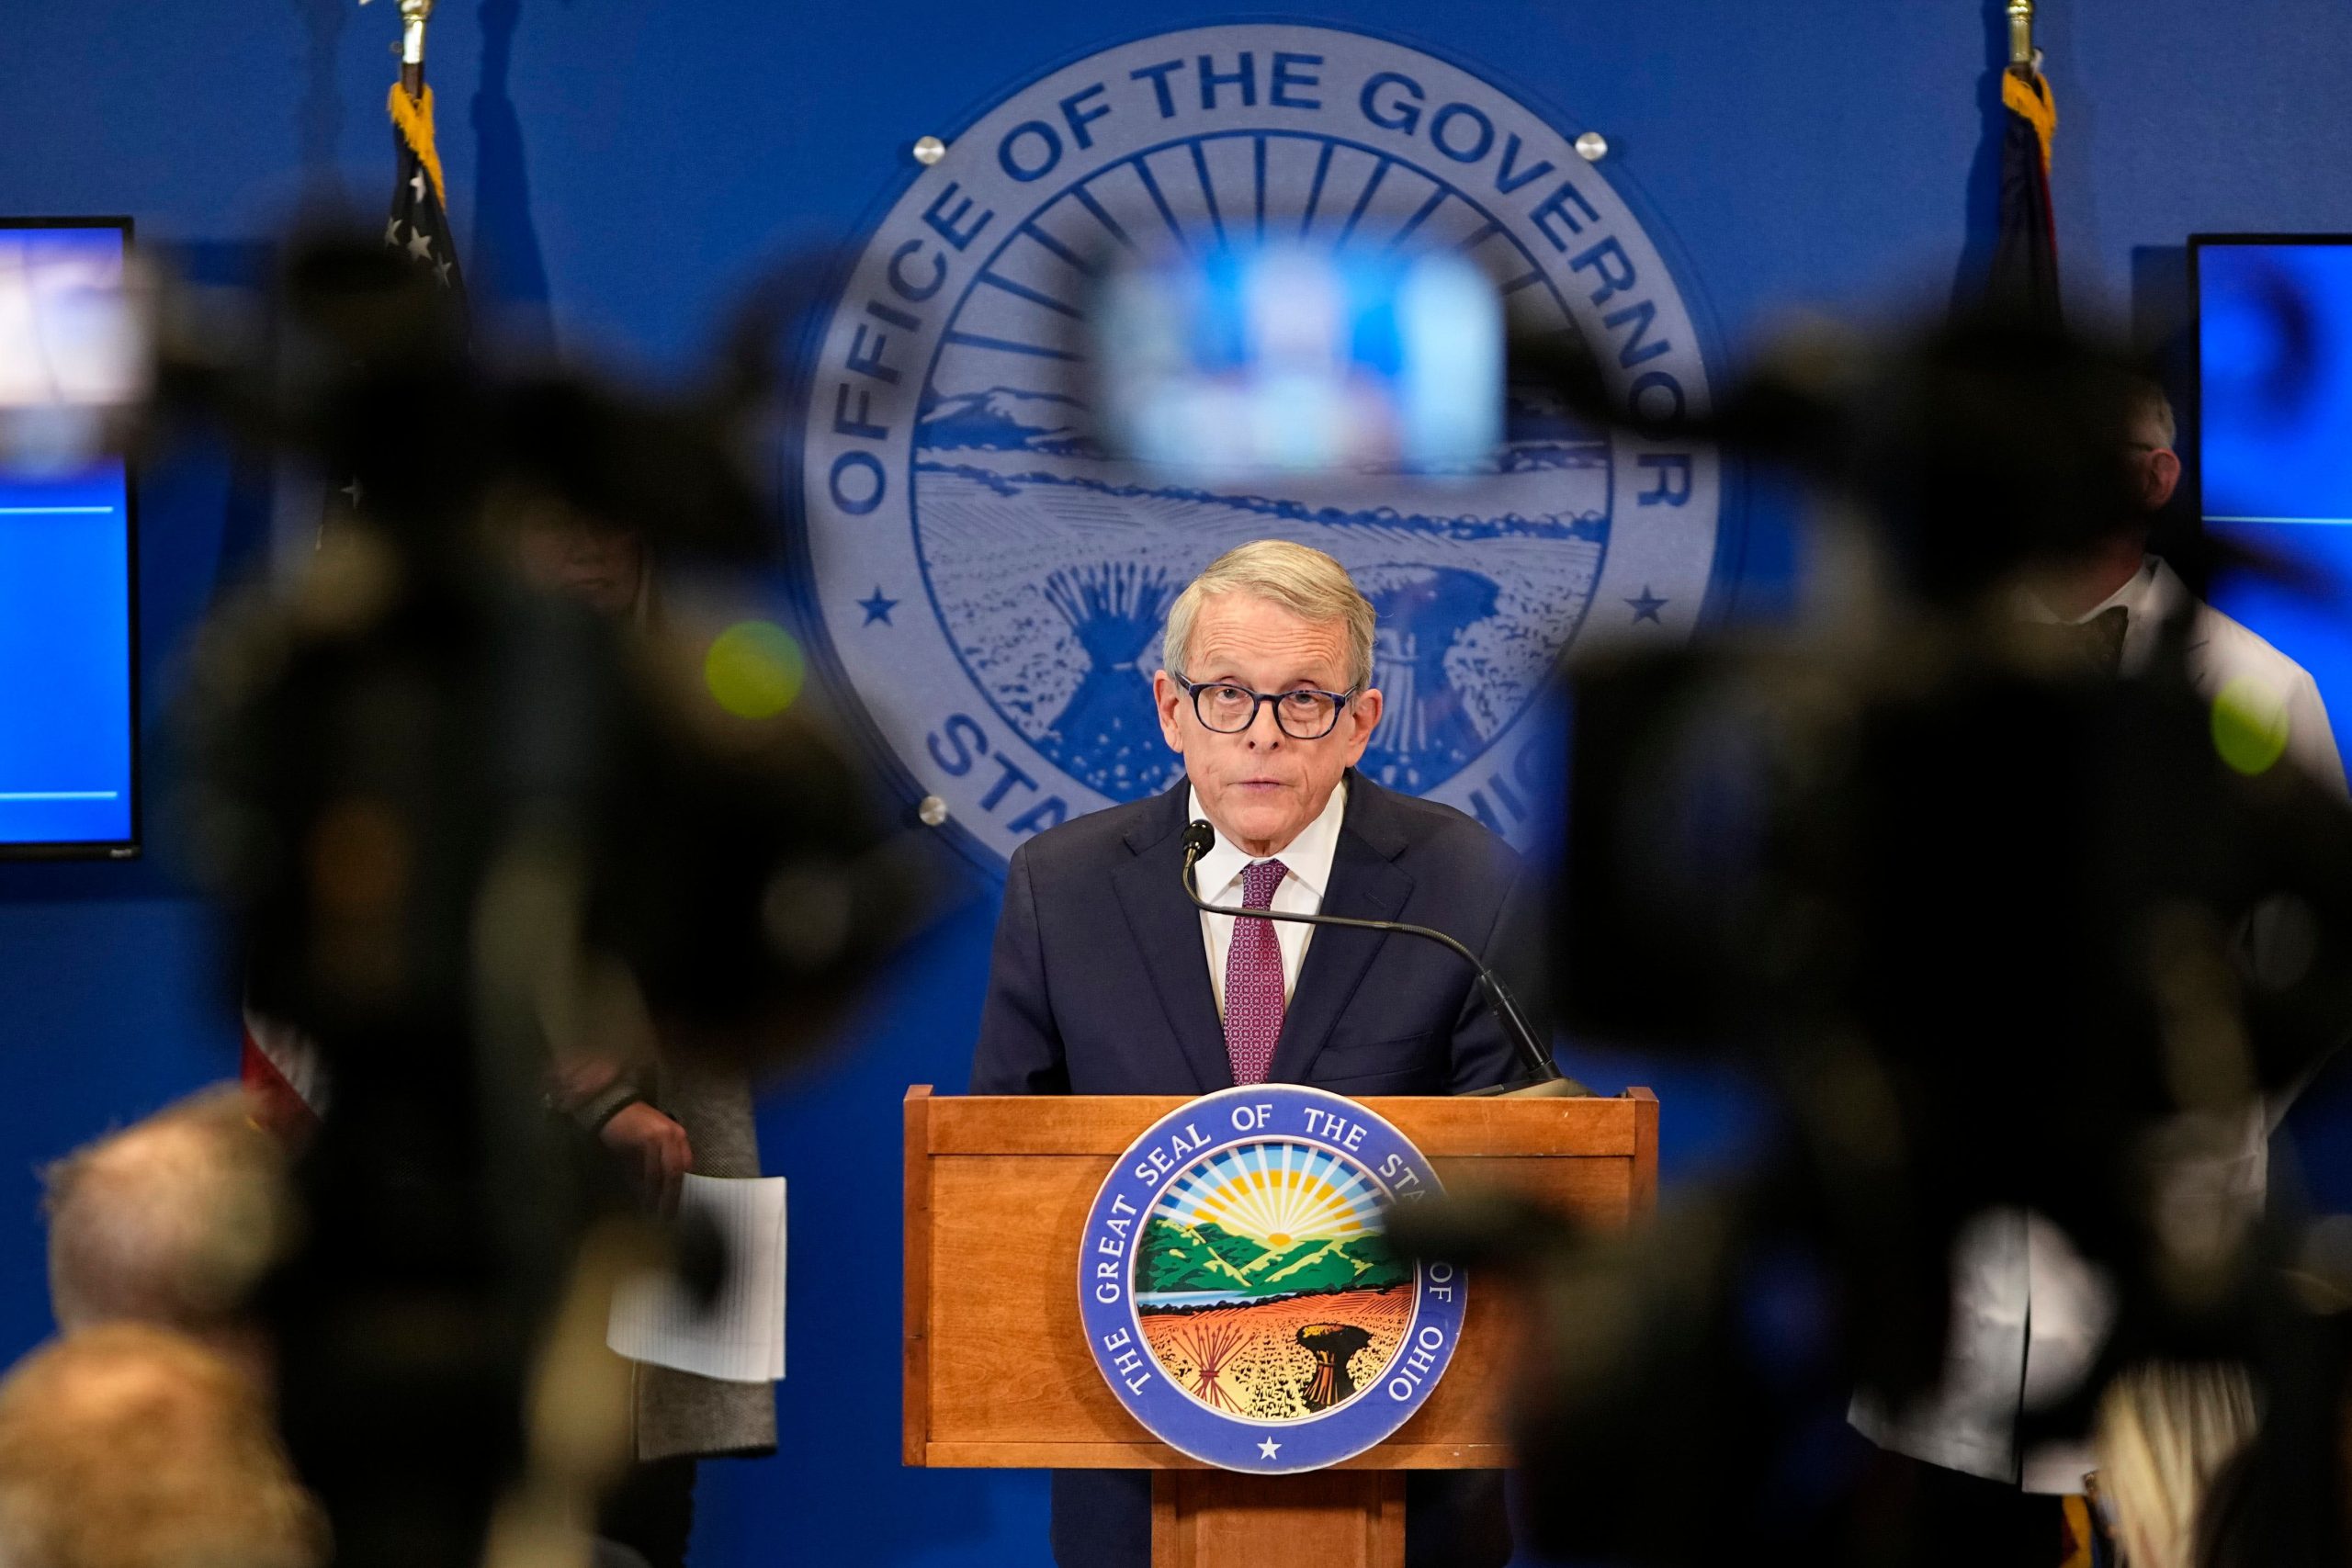 Trump who? Ohio’s Mike DeWine doesn’t have time to talk ageism, partisan rancor or 45